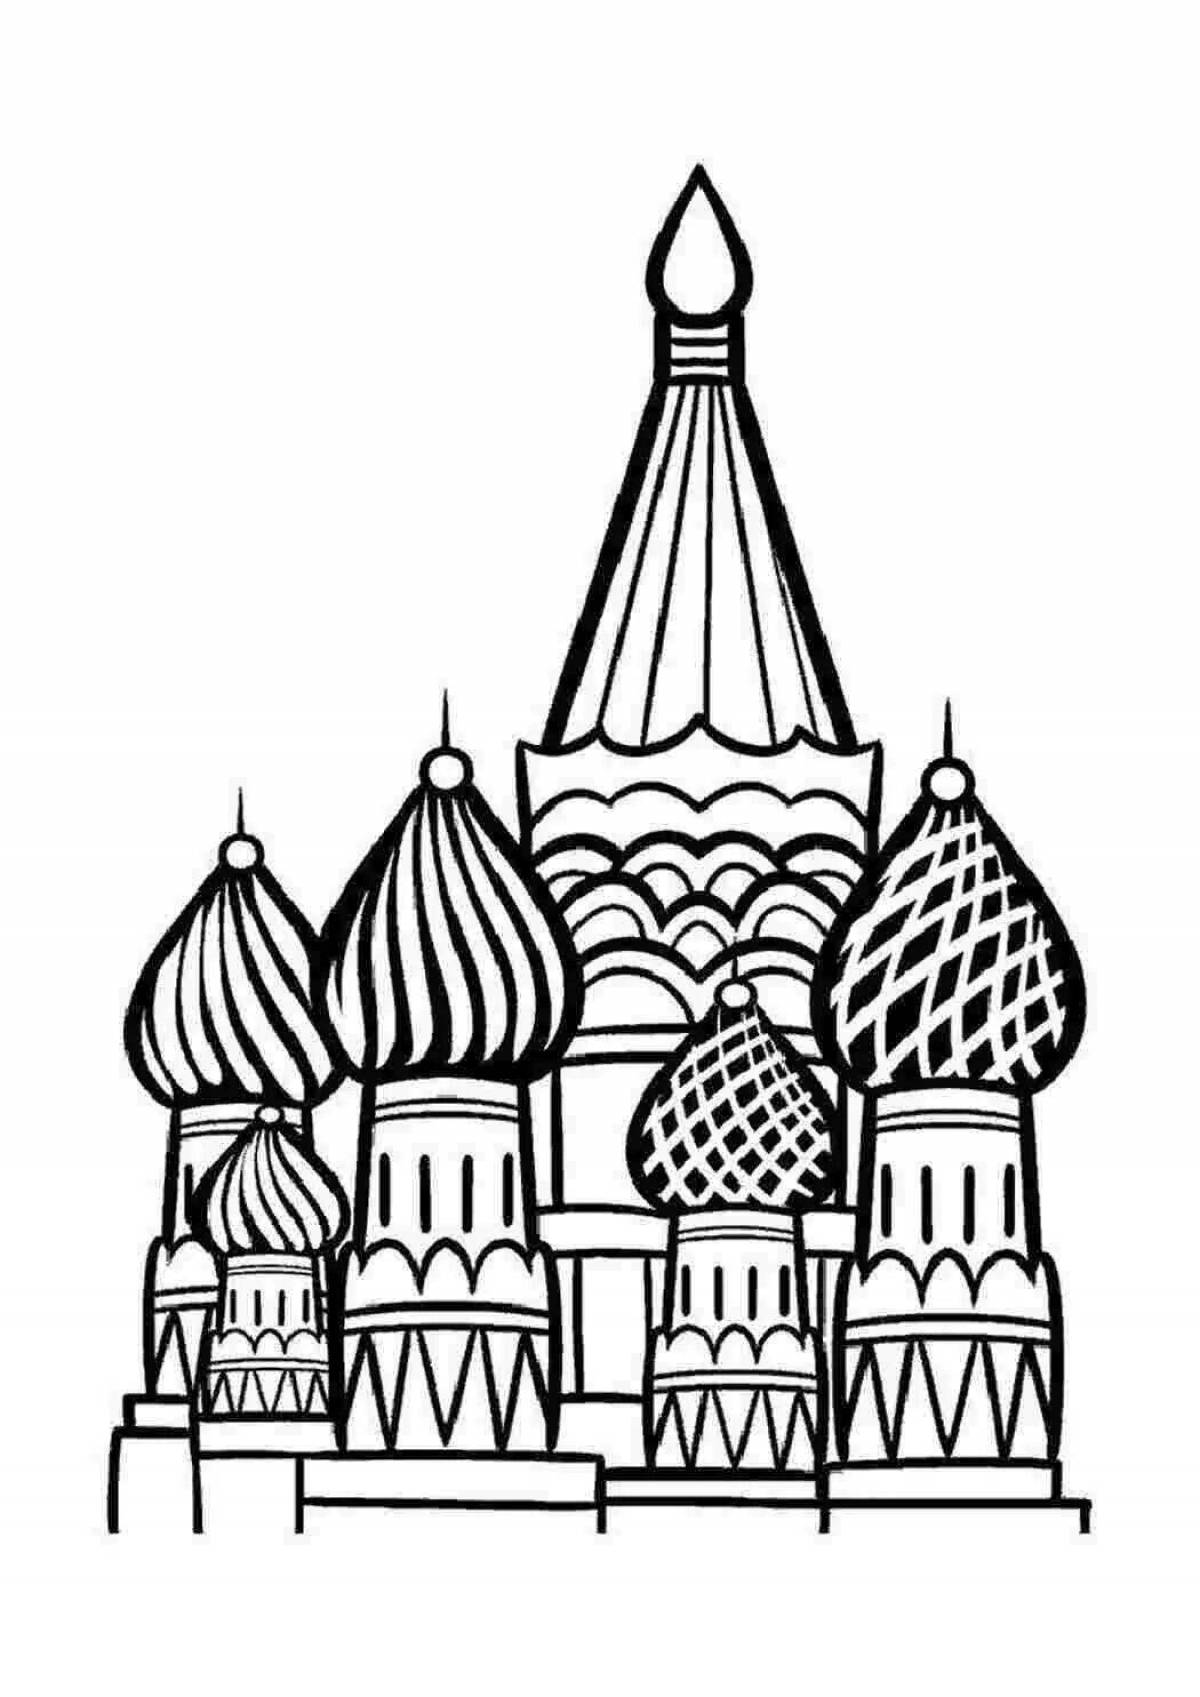 Coloring page glamorous saint basil's cathedral